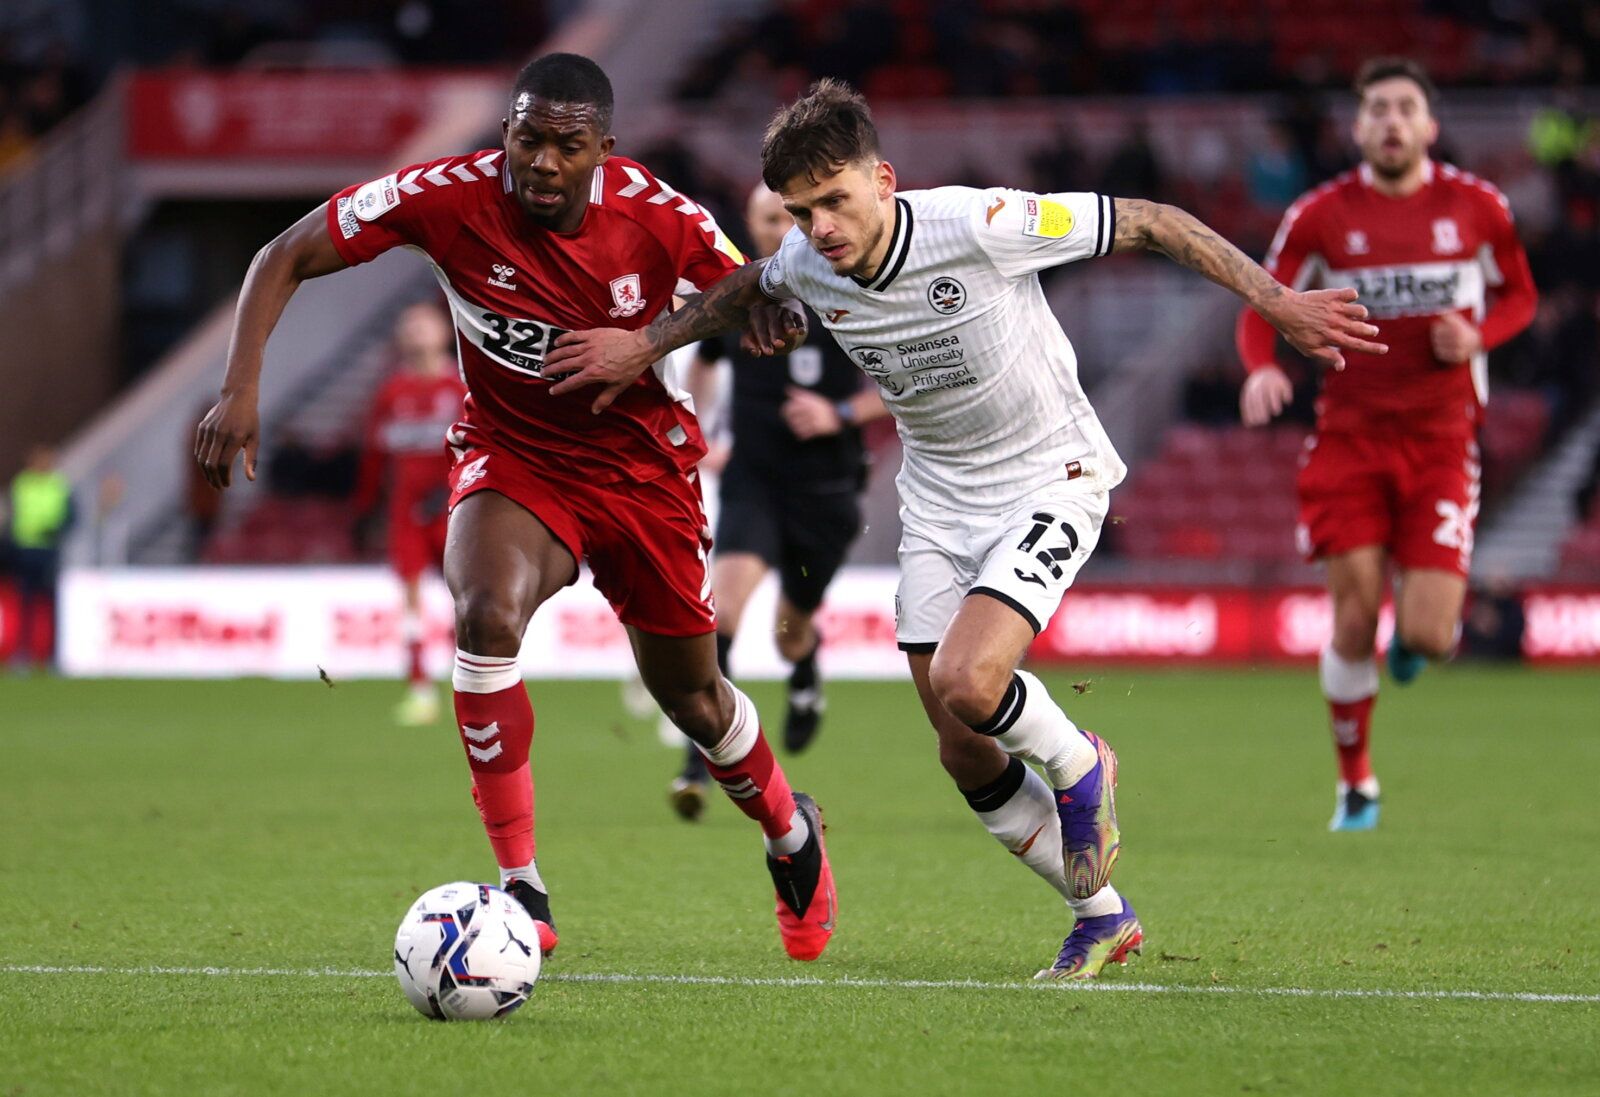 Soccer Football - Middlesbrough v Swansea City - Riverside Stadium, Middlesbrough, Britain - December 4, 2021  Swansea City's Jamie Paterson in action with Middlesbrough's Anfernee Dijksteel  Action Images/John Clifton  EDITORIAL USE ONLY. No use with unauthorized audio, video, data, fixture lists, club/league logos or 